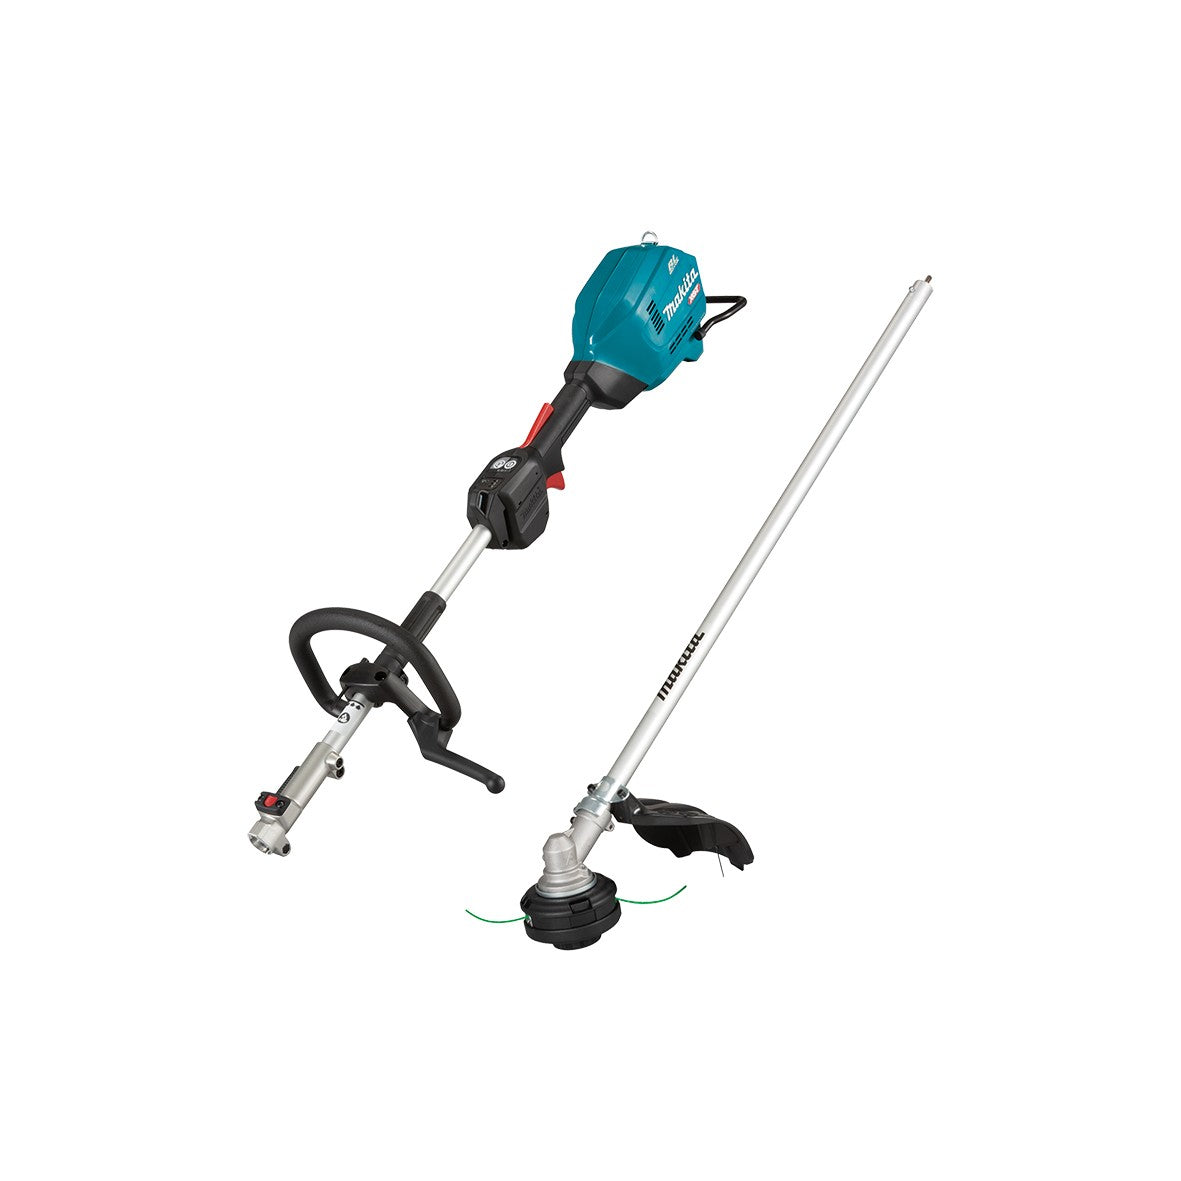 40V Max XGT Brushless Multi Function Powerhead Line Trimmer EM409MP (Tool Only) UX01GZ08 by Makita